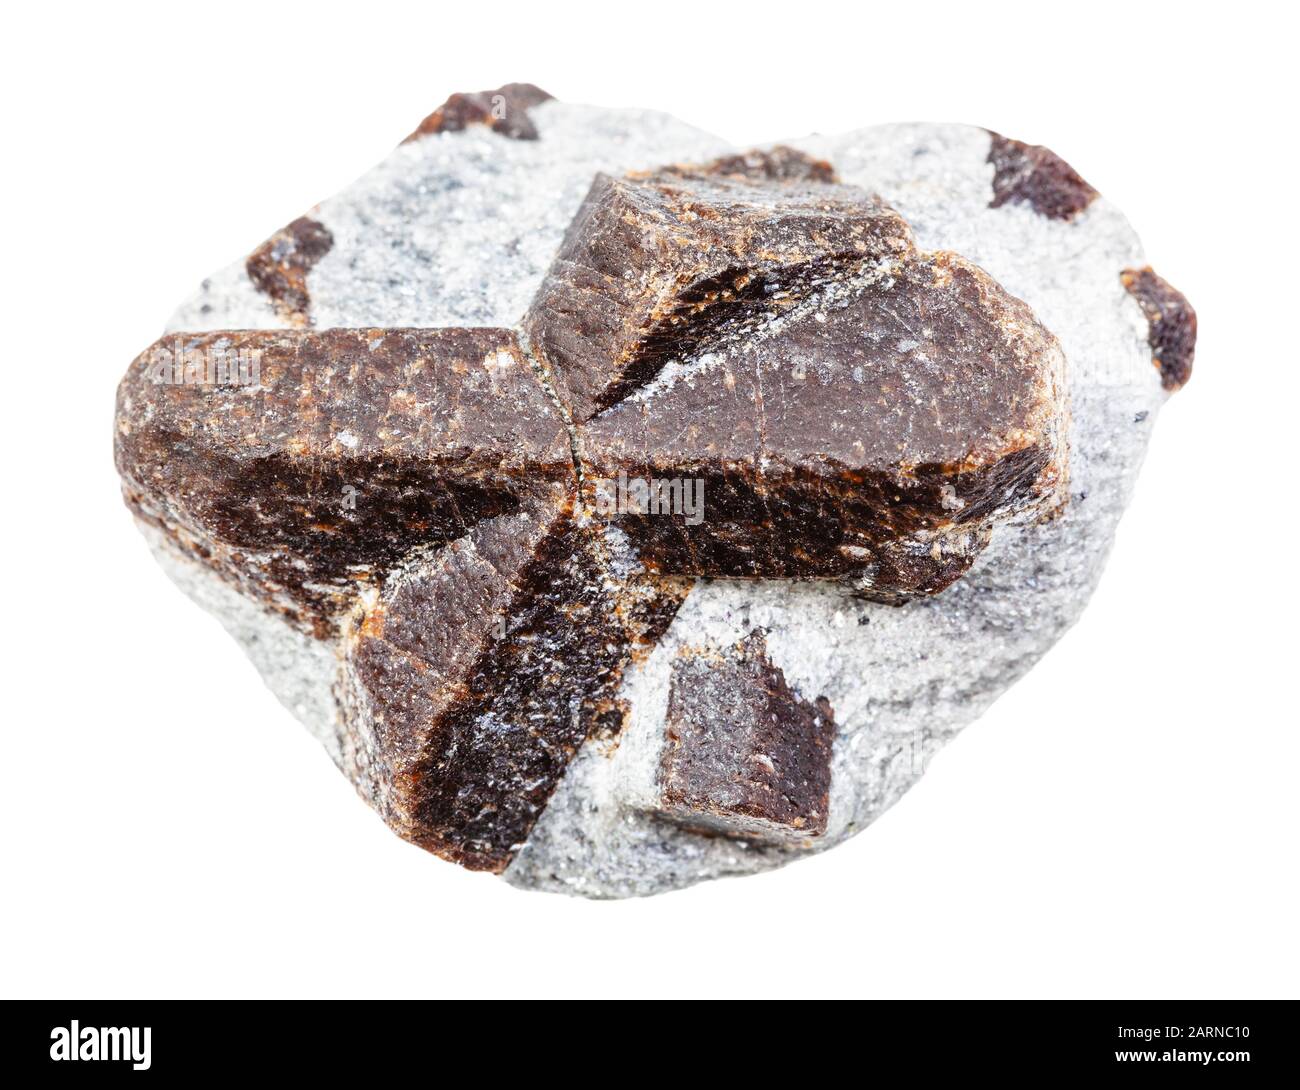 closeup of sample of natural mineral from geological collection - unpolished Staurolite in mica schist rock isolated on white background Stock Photo